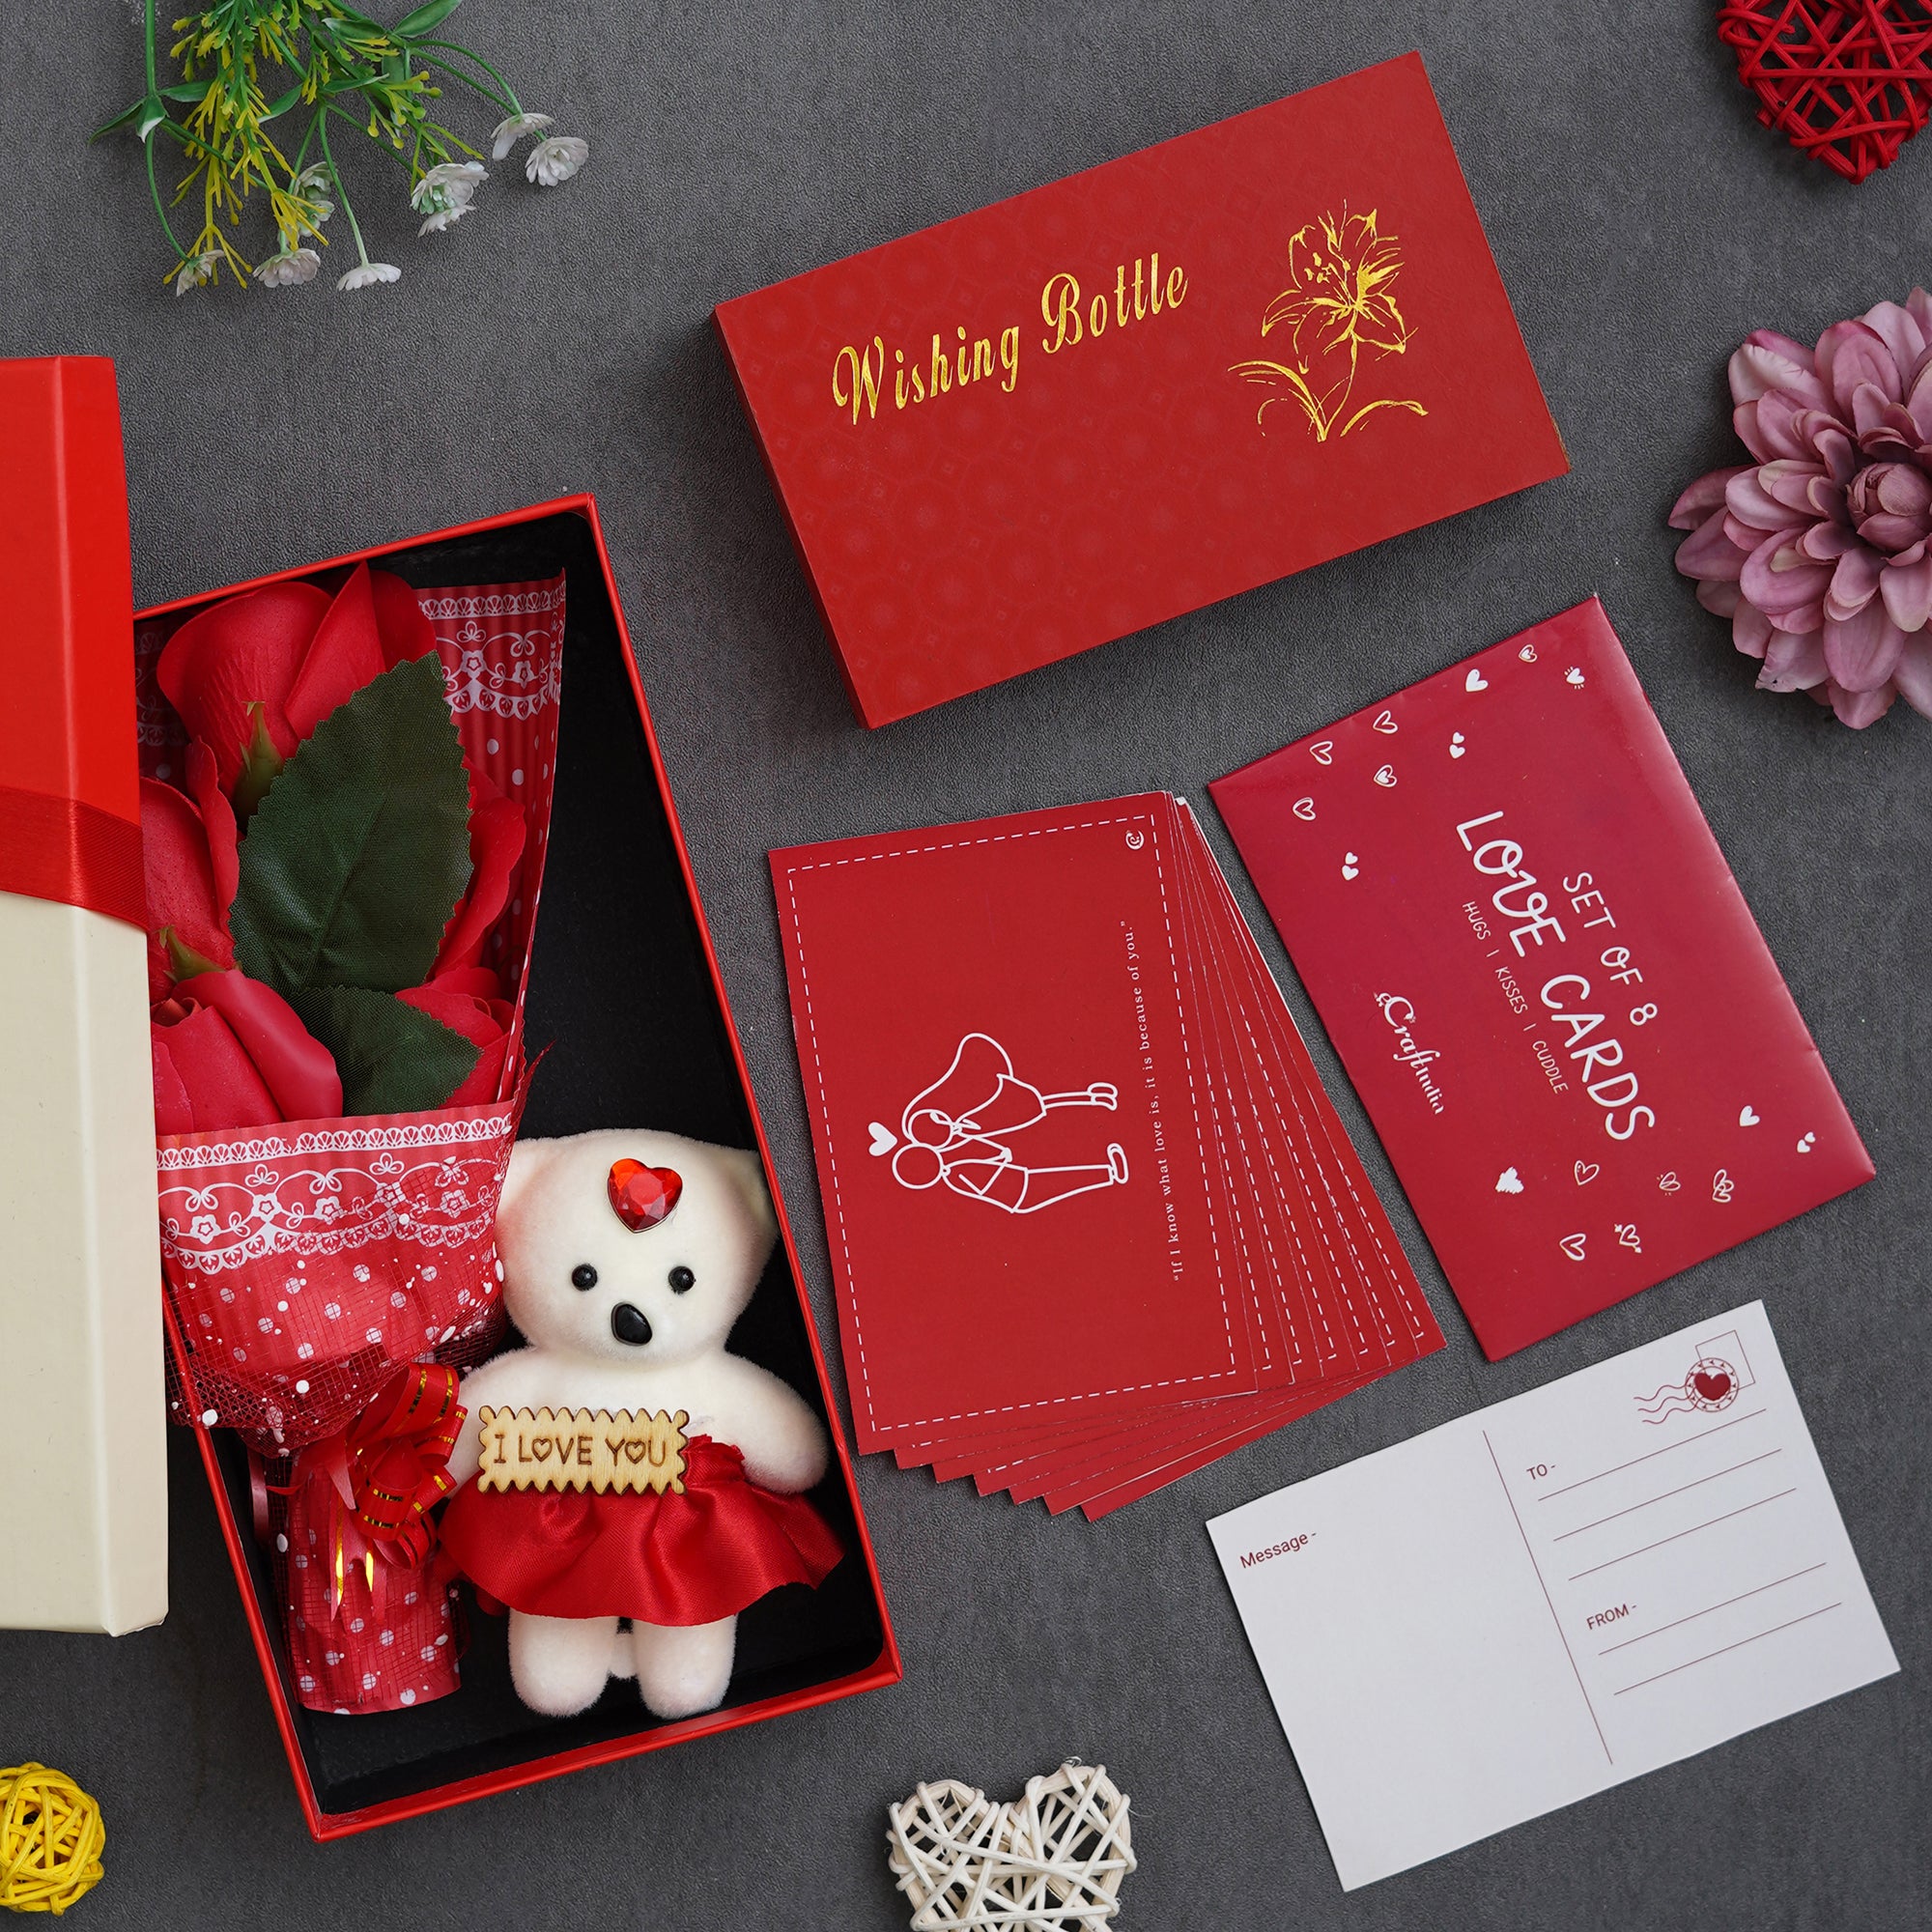 Valentine Combo of Pack of 8 Love Gift Cards, Red Roses Bouquet and White, Red Teddy Bear Valentine's Rectangle Shaped Gift Box, Red Message Bottle Wooden Box Set